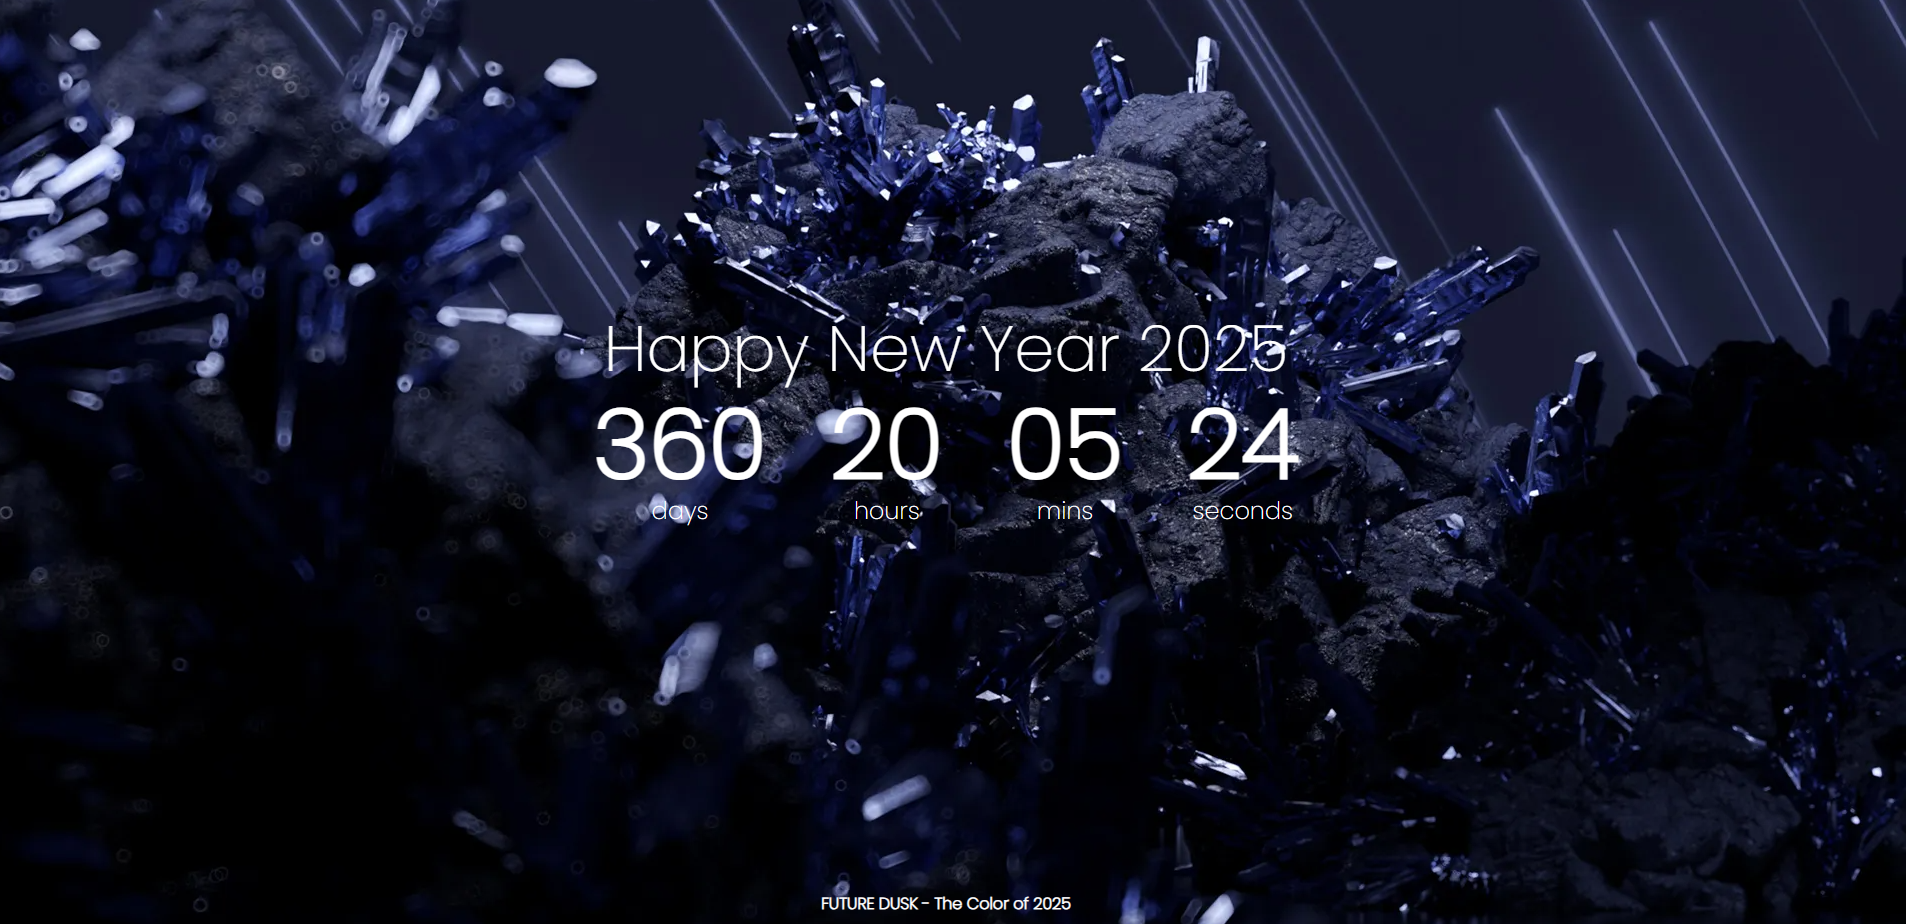 [PROJECT] countdowntimer 2025